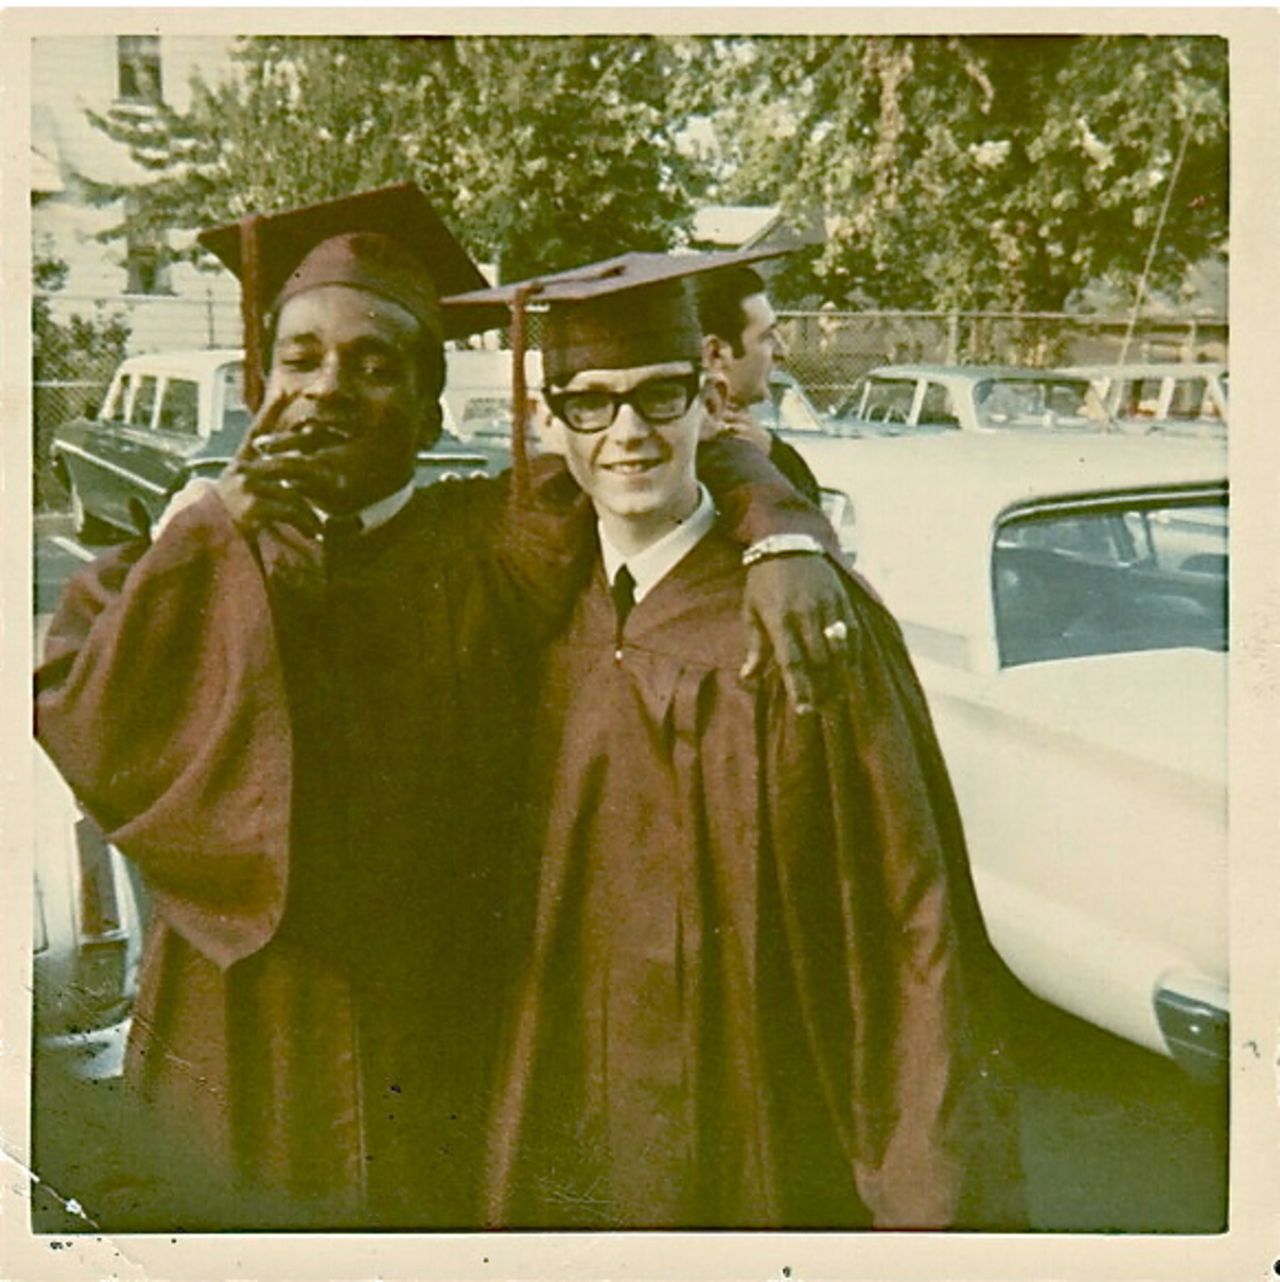 <a href="http://ireport.cnn.com/docs/DOC-947653">Raymond Johnson</a>, right, poses with his friend on their high school graduation day in 1968. "There are no dress codes today, so young people are free to choose what they like and feel is most comfortable," he says. "That in itself is a giant leap from the '60s." 